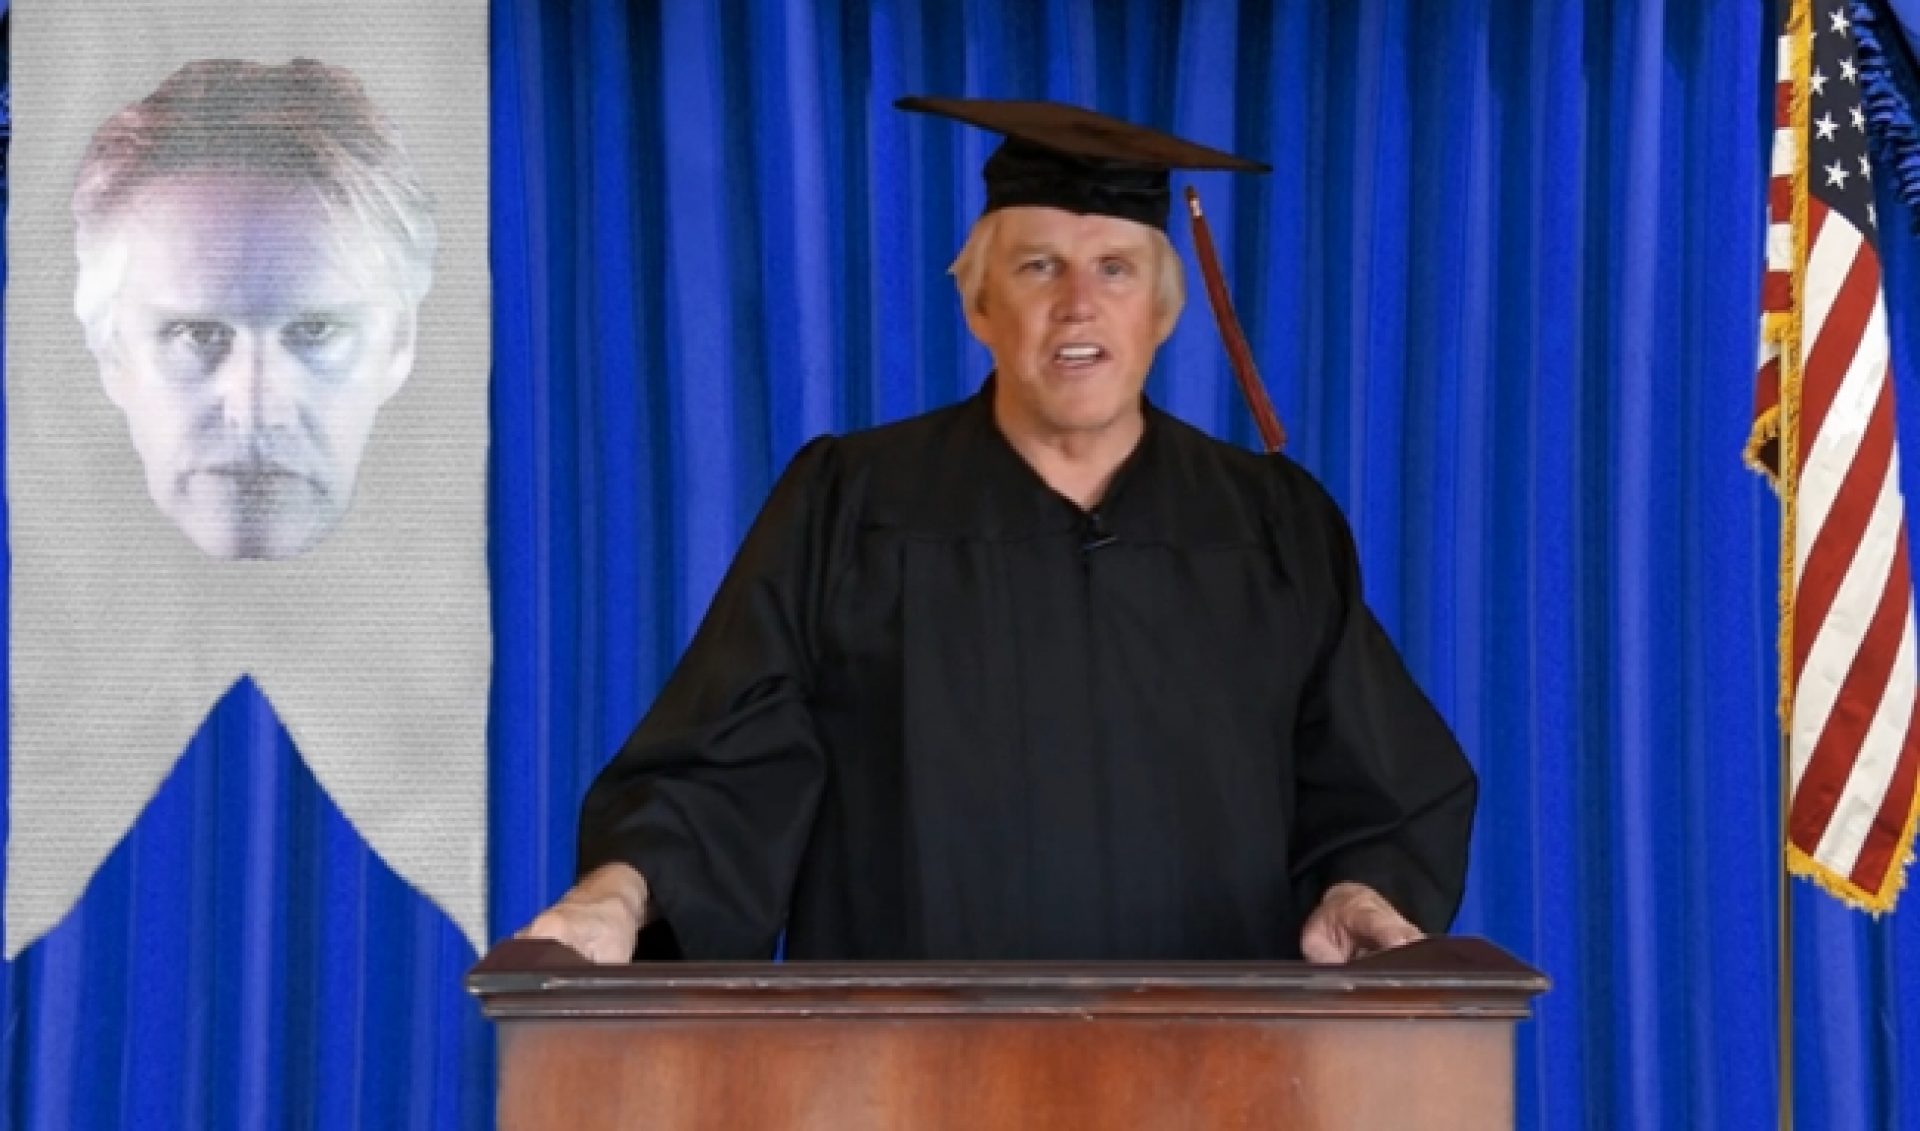 Gary Busey Gives Crazy Commencement Address Via His Blip Web Series